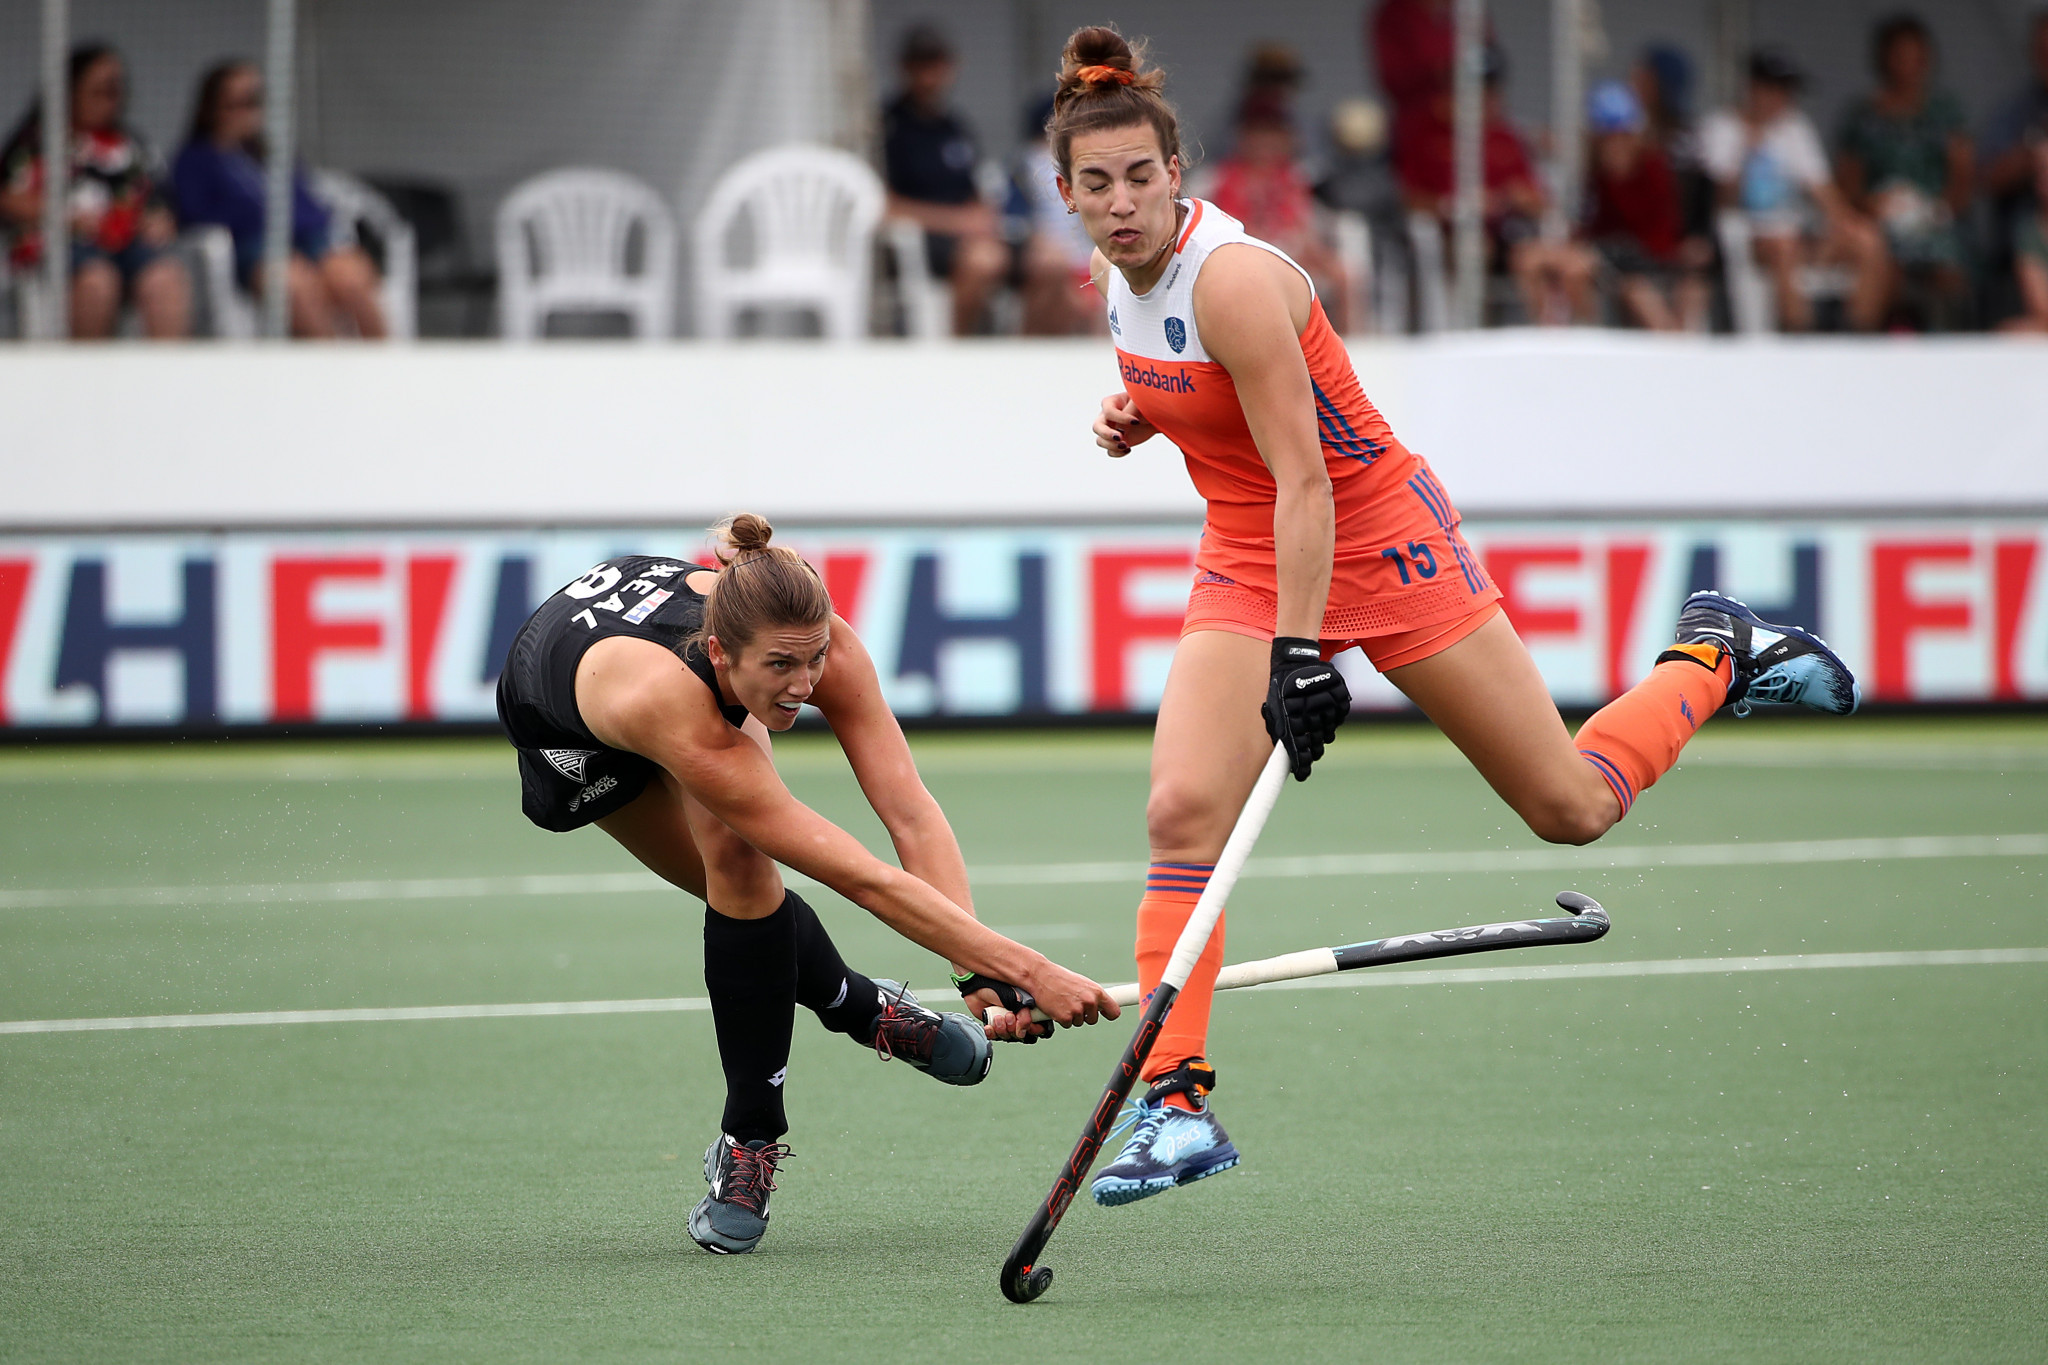 The Netherlands won both the men's and women's matches against New Zealand in Auckland ©Getty Images